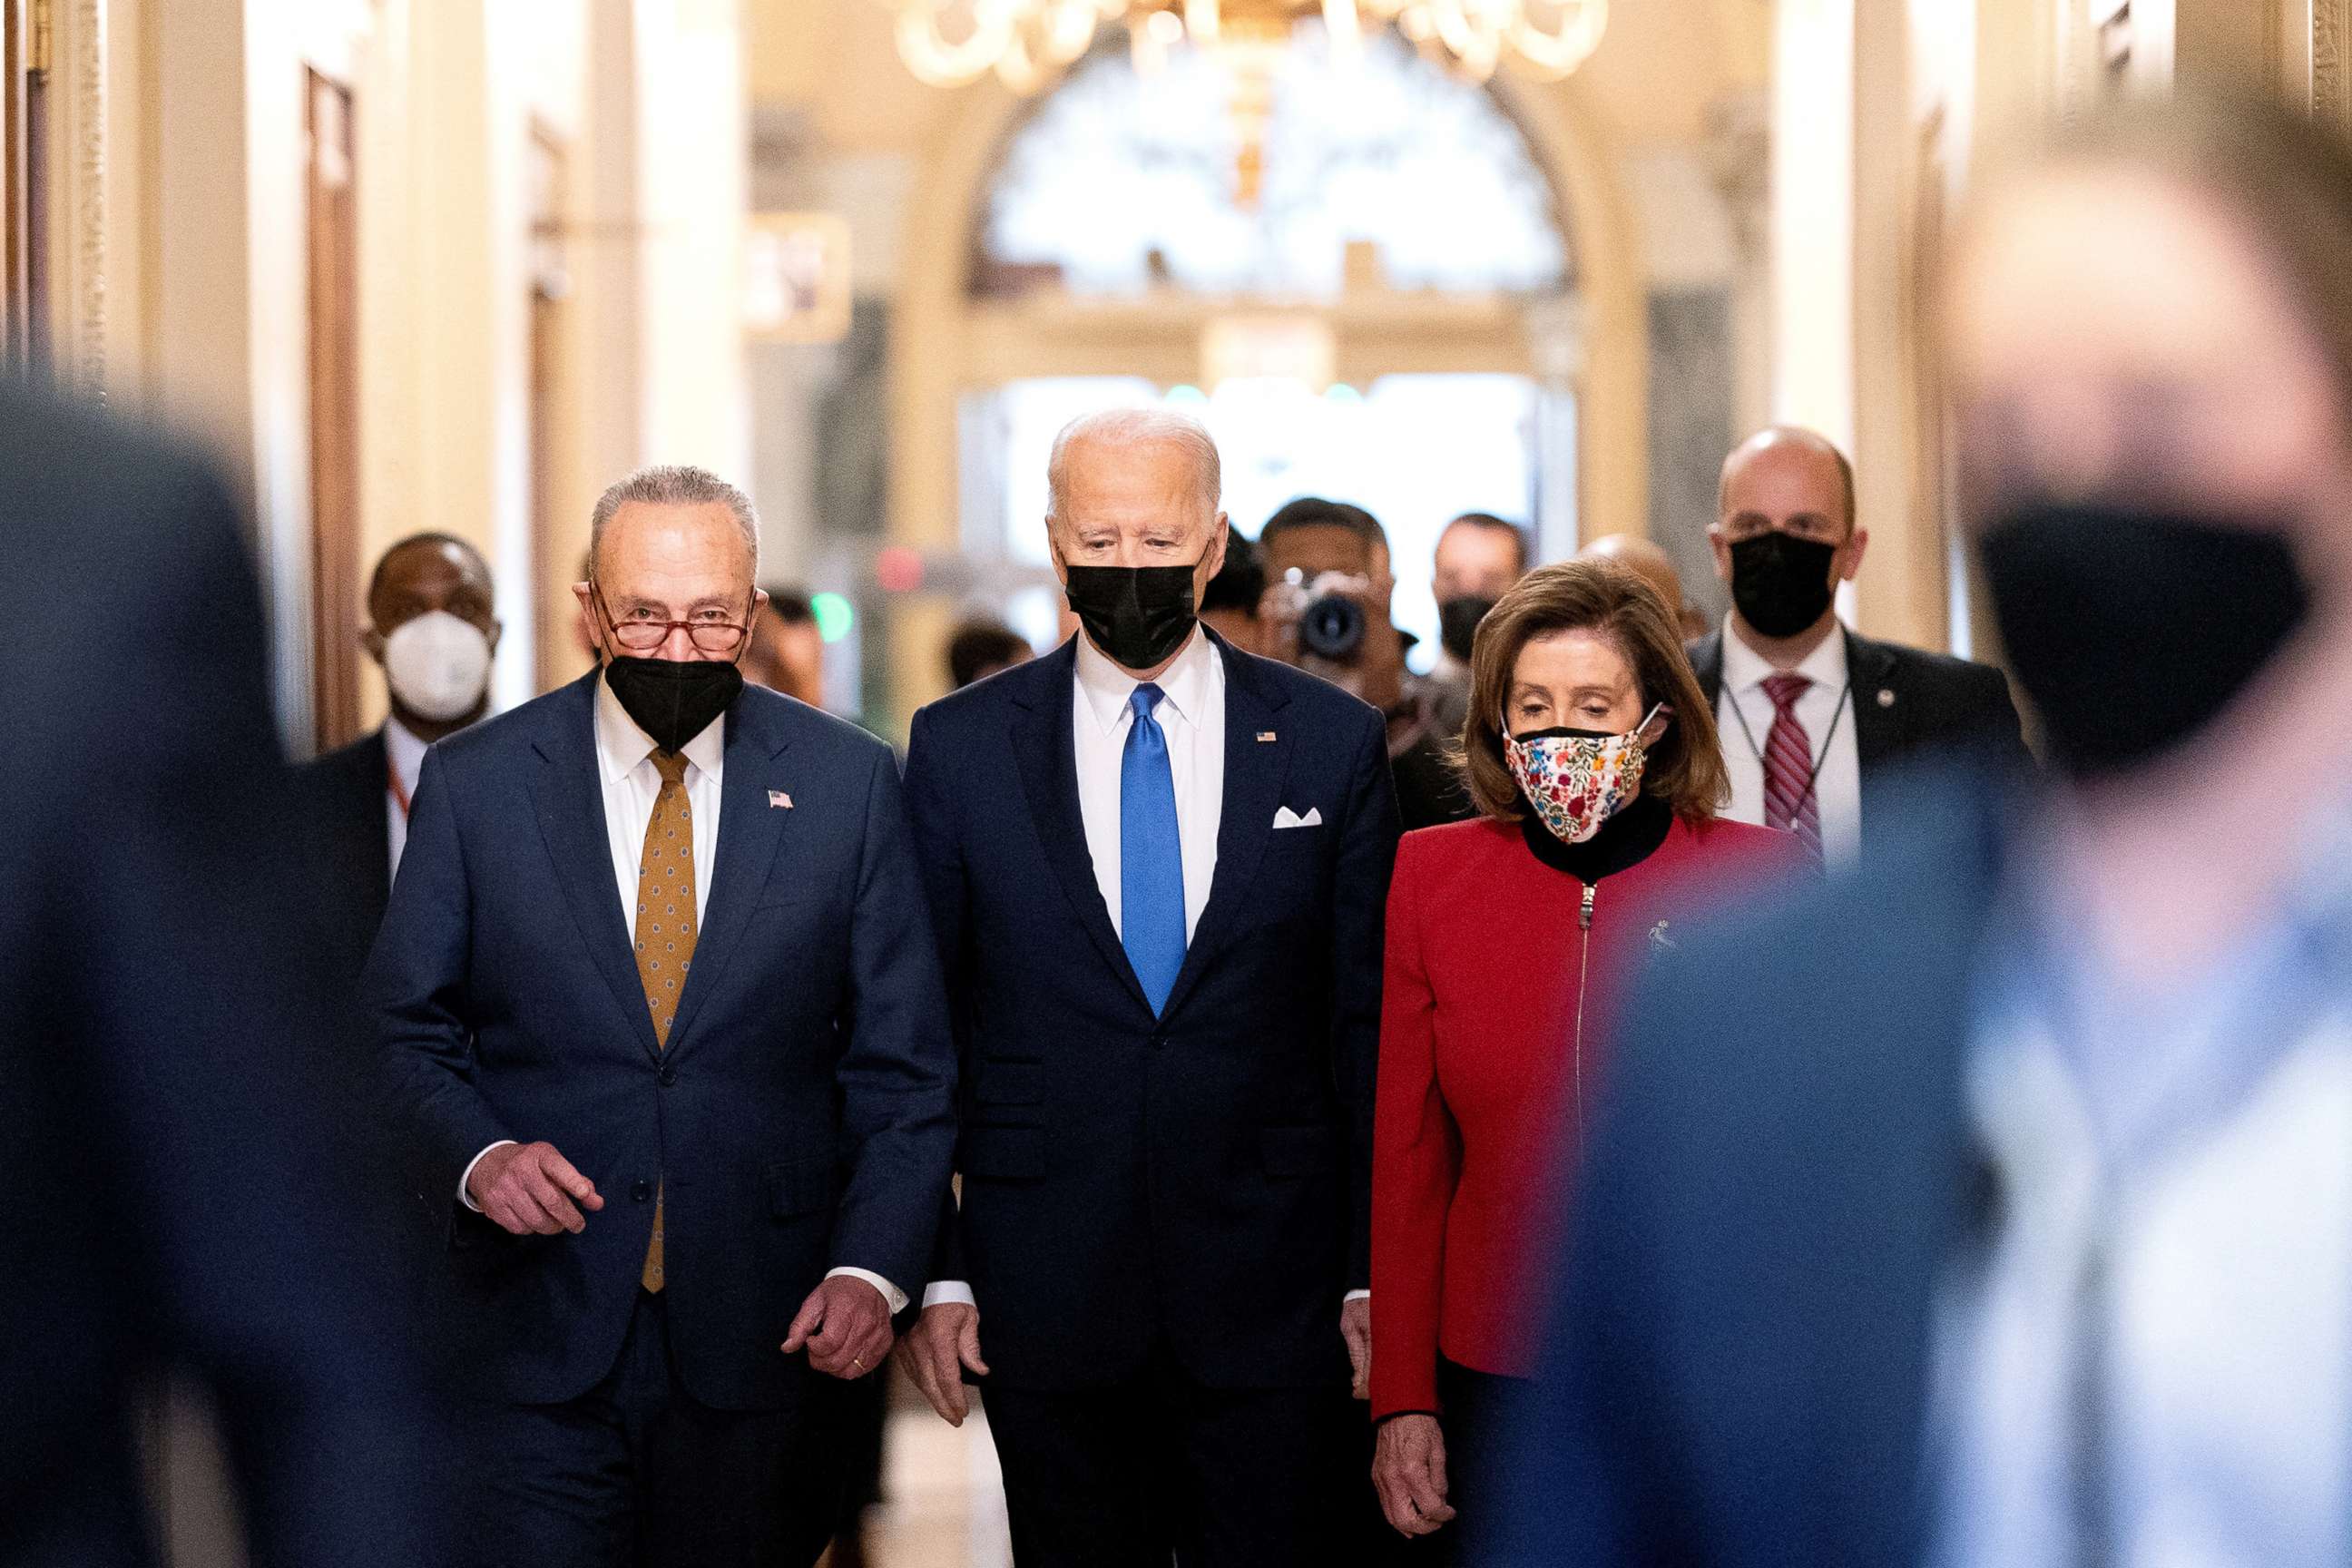 PHOTO: President Joe Biden joined by Senate Majority Leader Chuck Schumer and House Speaker Nancy Pelosi walk through the Hall of Columns before speaking during a ceremony on the first anniversary of the January 6 attack in, Jan. 6, 2022. 